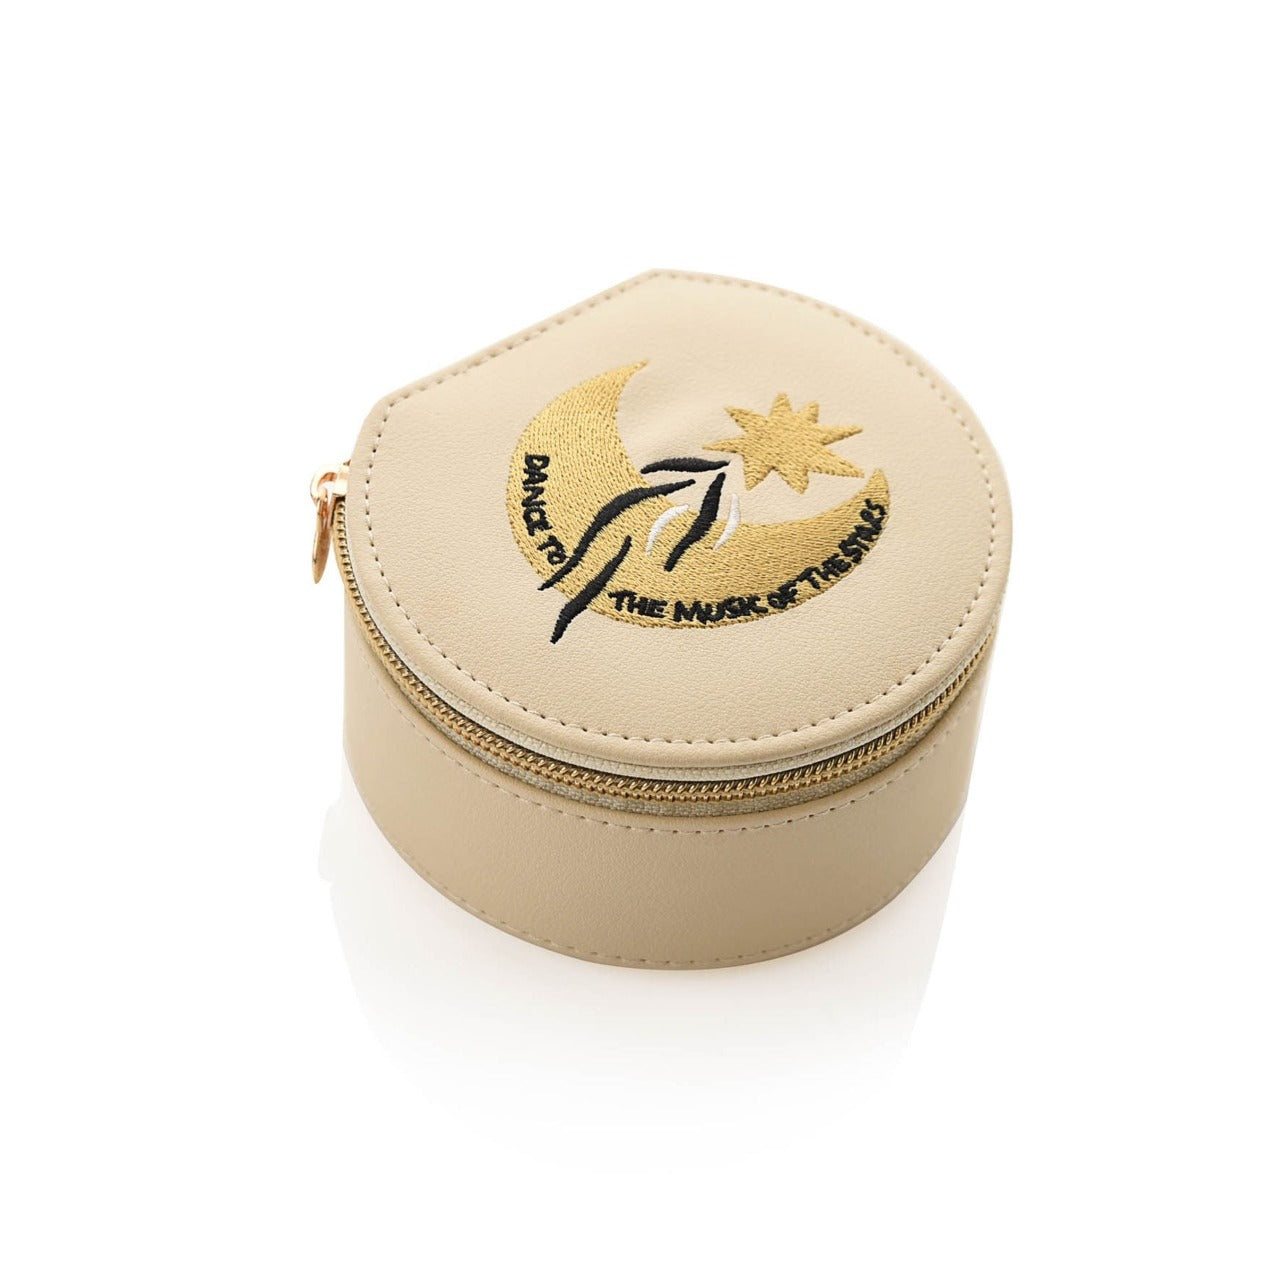 Righteous & Kind Jewellery Box  This pretty faux leather jewellery box would make a fashionable gift for any loved one. Whether for friends, family, or partners, gift them this stylish and safe place to store their jewellery. 